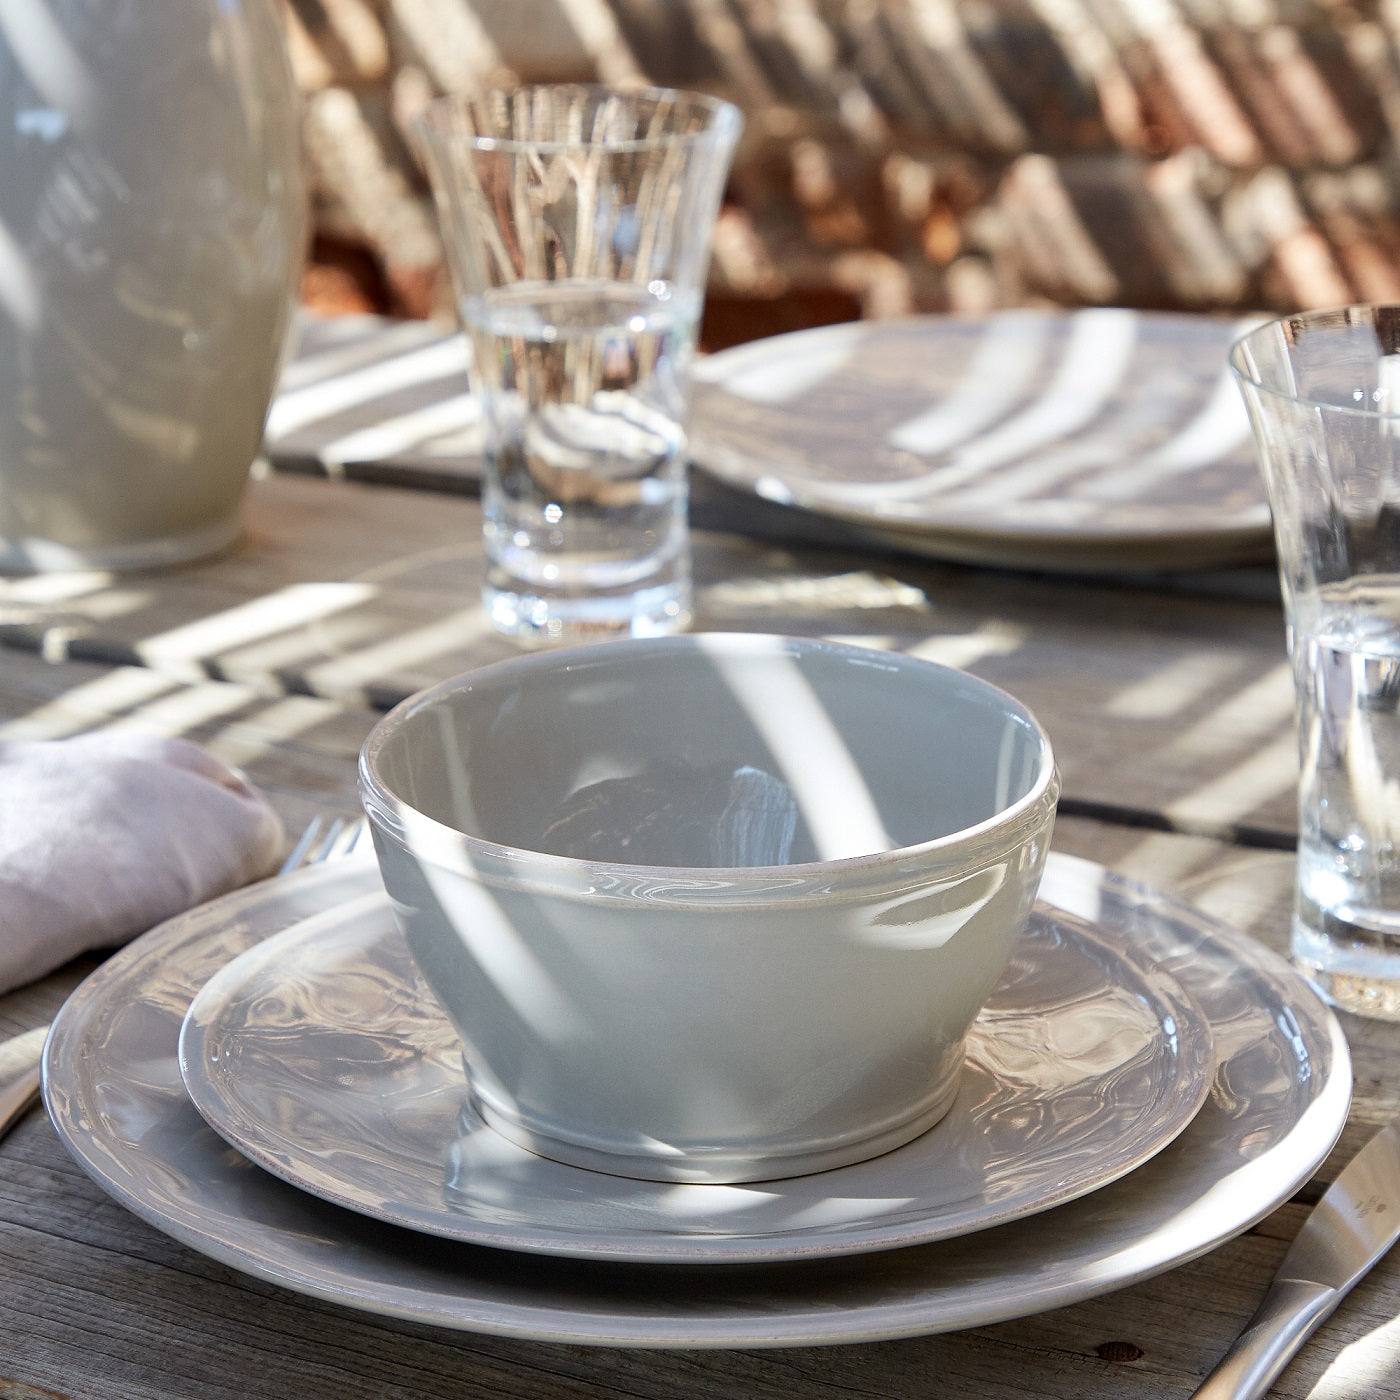 Pearly white dinnerware set on outdoor dining table, with cereal bowl, side plate and dinner plate.